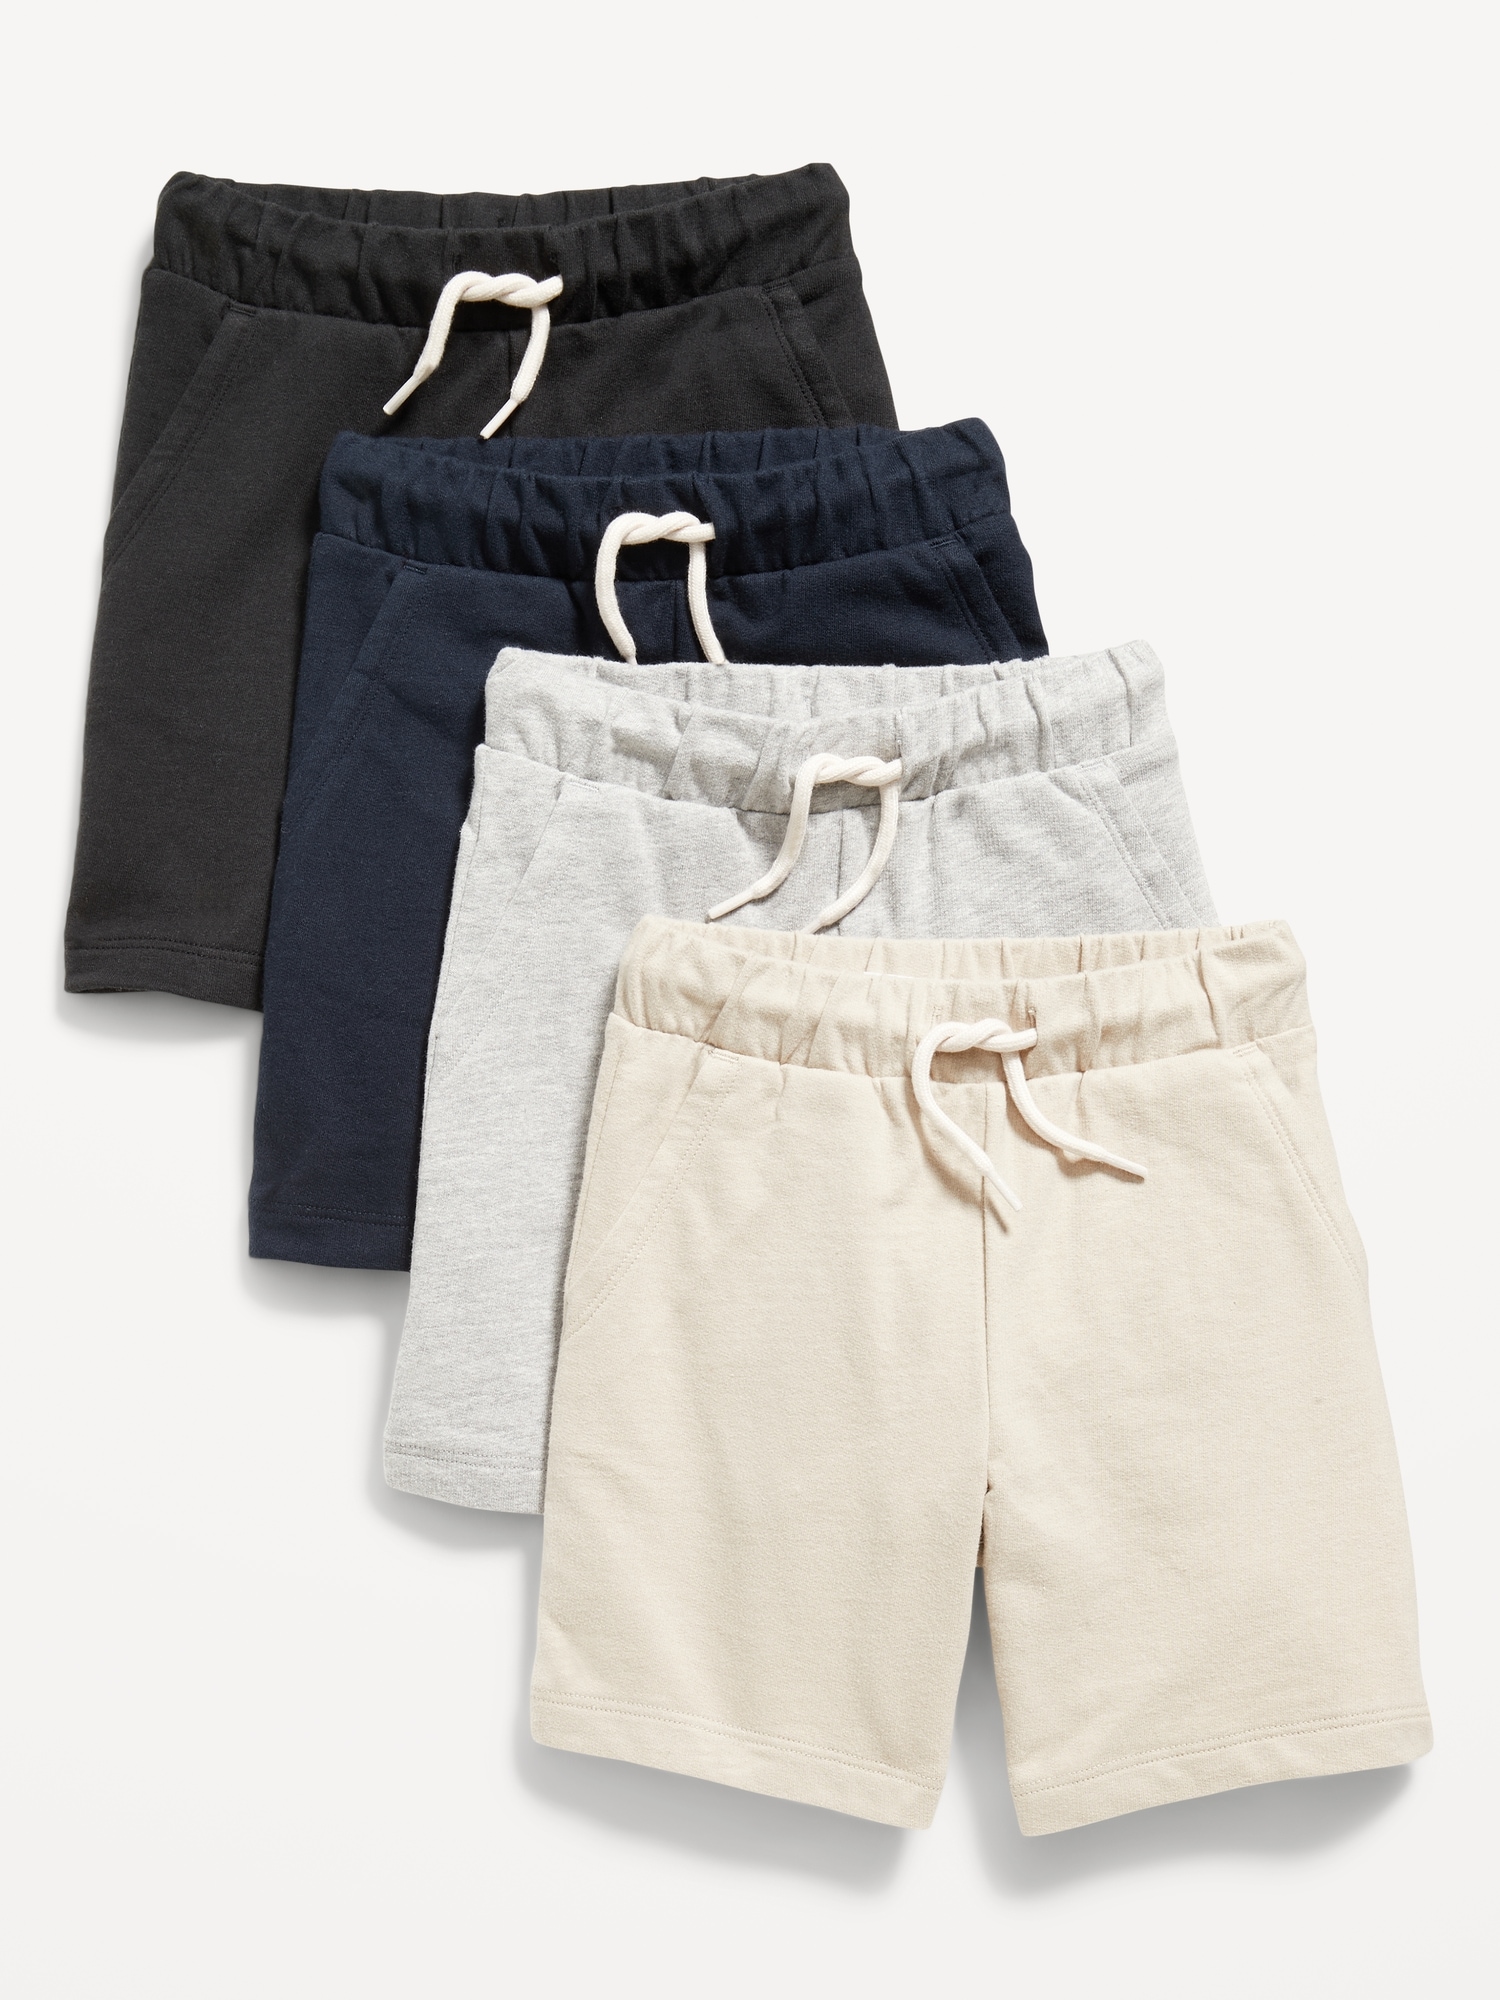 Old Navy Functional Drawstring Shorts 4-Pack for Toddler Boys - - Size 3T